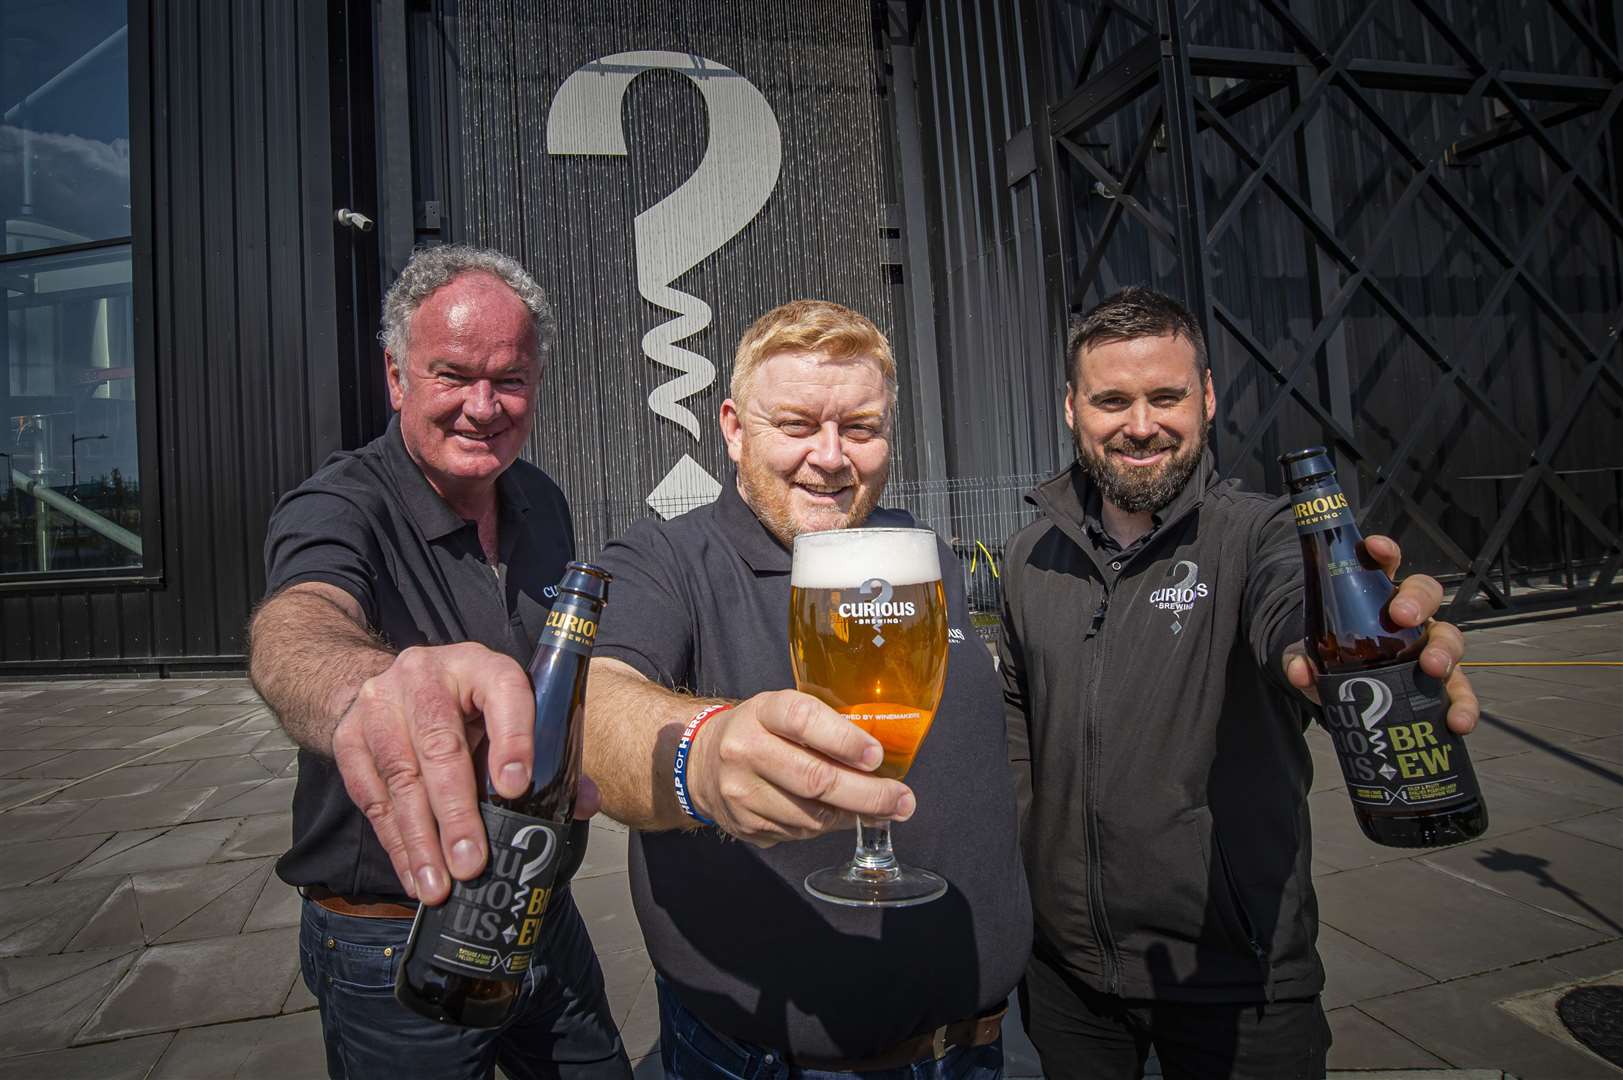 Mark Crowther, Simon George and Matt Anderson are now heading up Curious Brewery